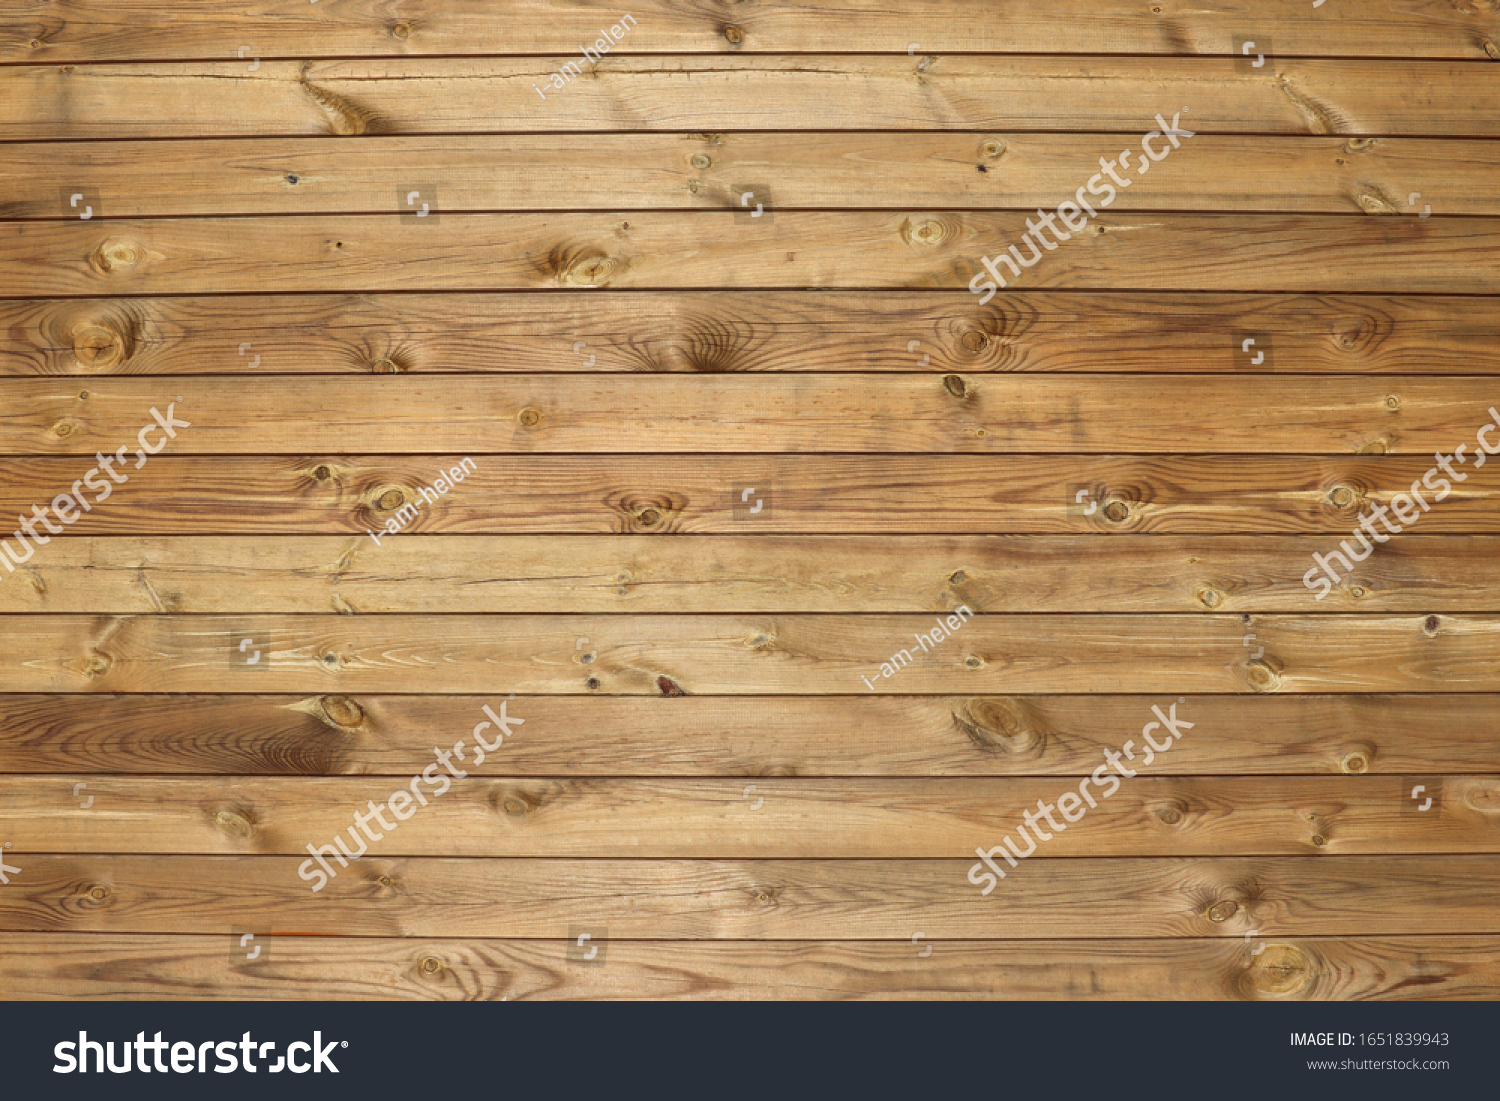 Dark brown wooden fence for abstract wooden backgrounds and textures. Wood horizontal panels with knots. #1651839943